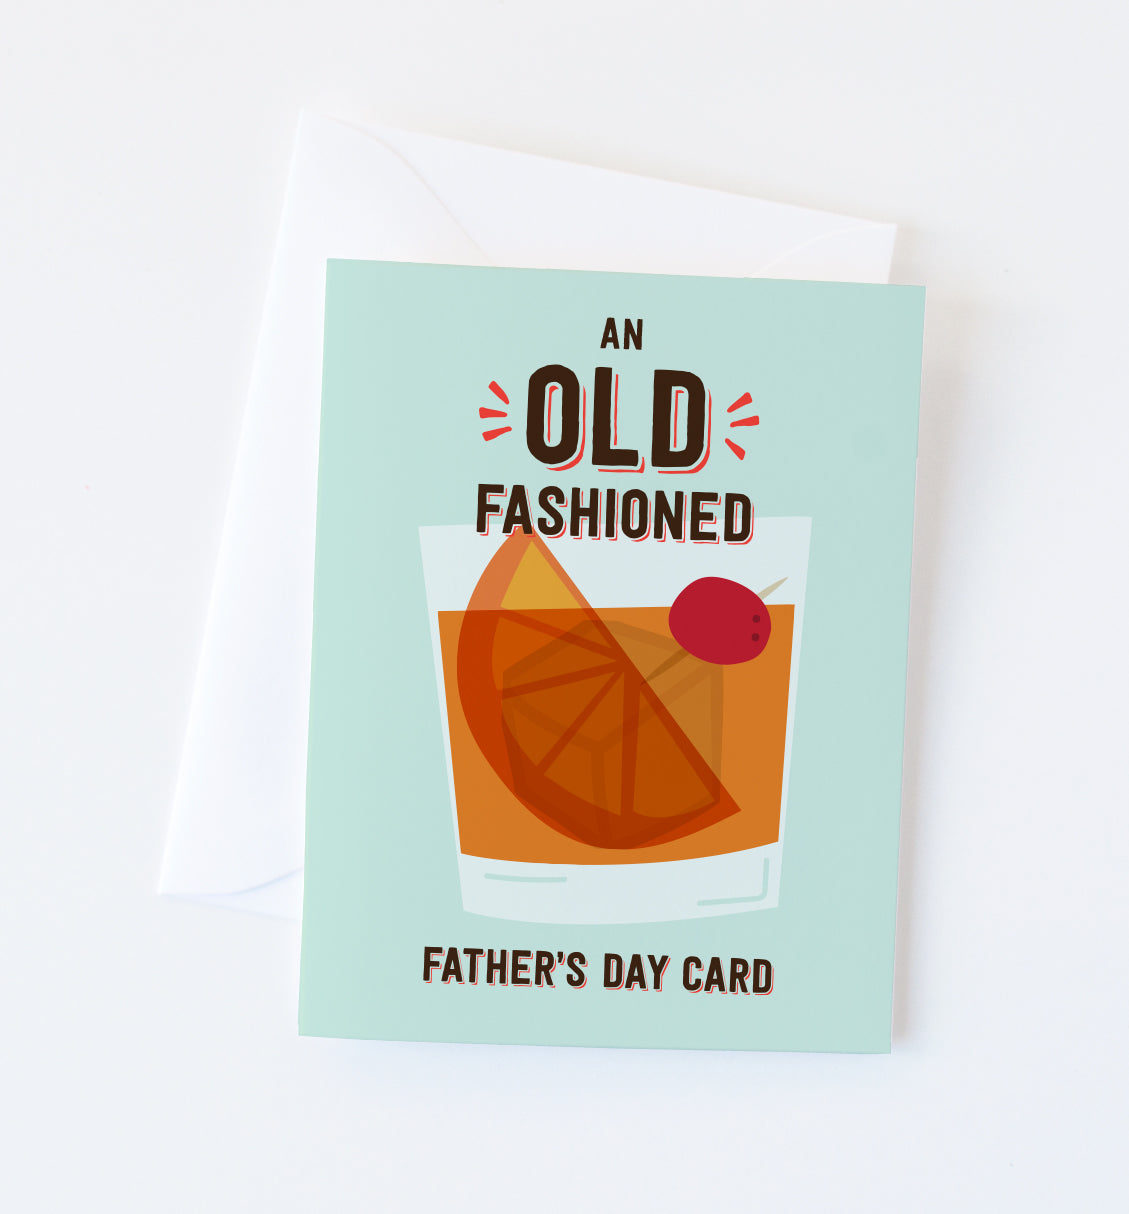 Old Fashioned Father's Day card